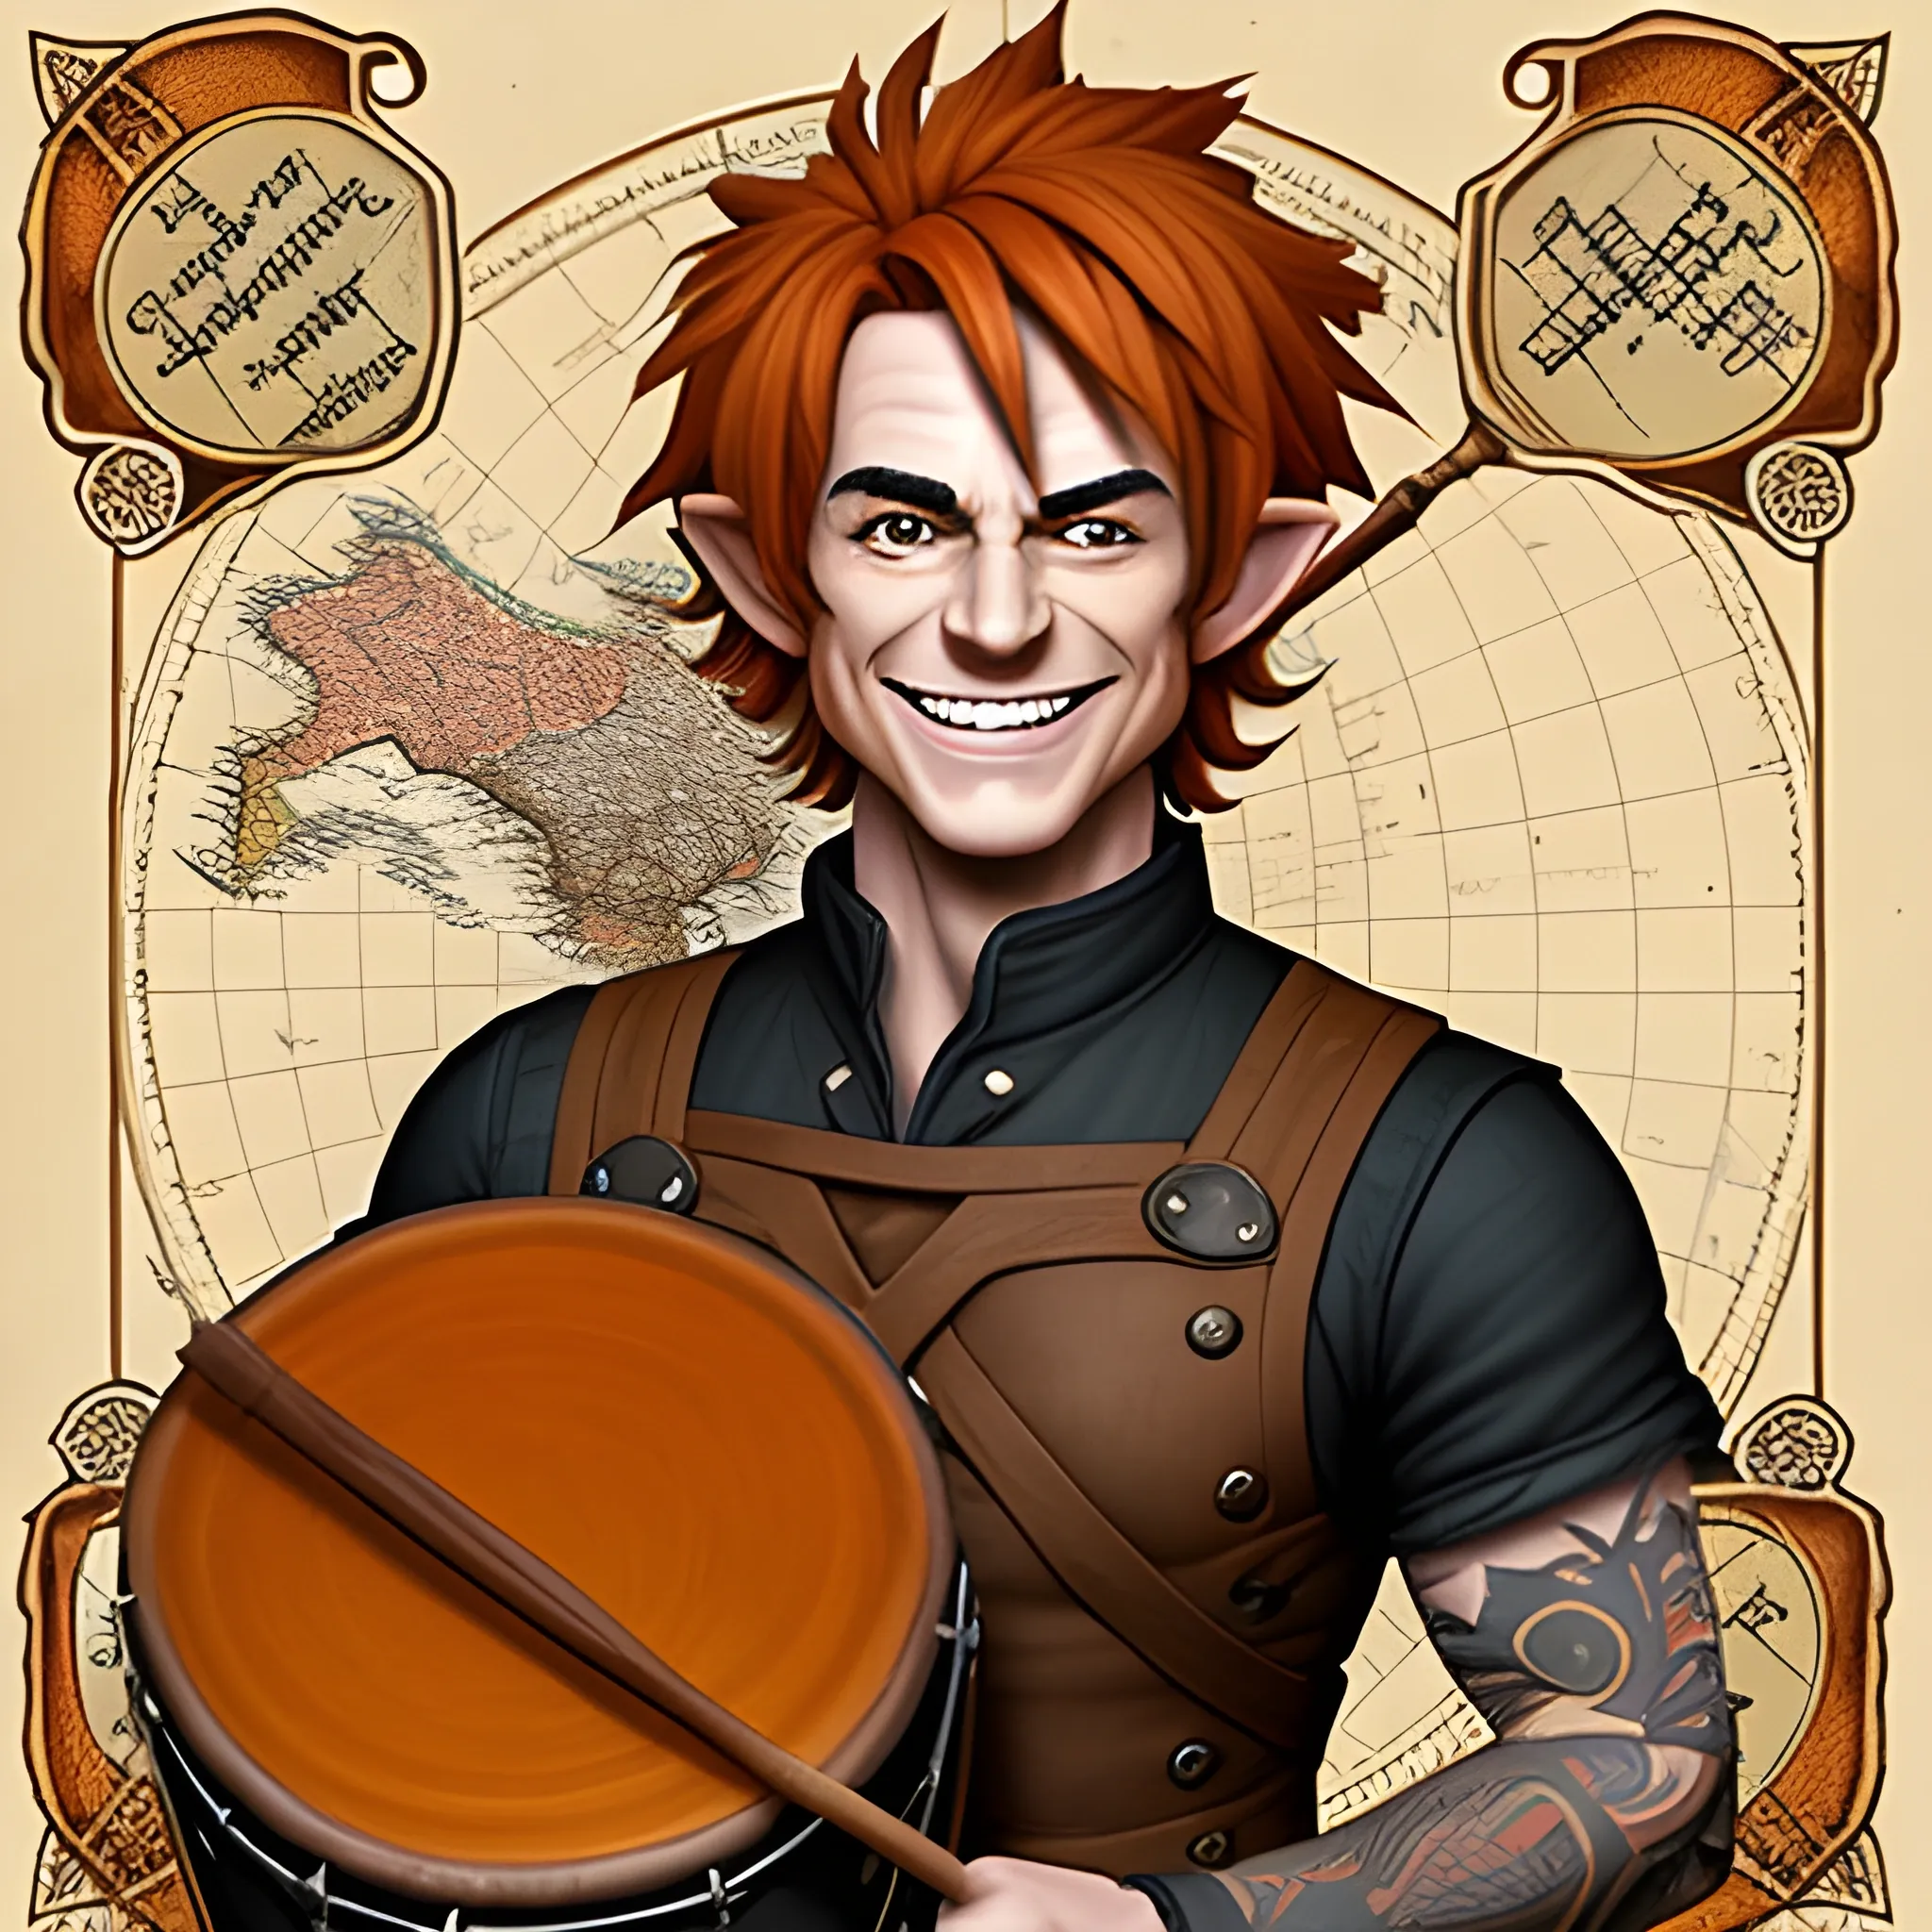 DnD weak young halfling male short haired halfling dark orange ginger with a map tattoo smiling with a mugshot expression and playing a small drum 